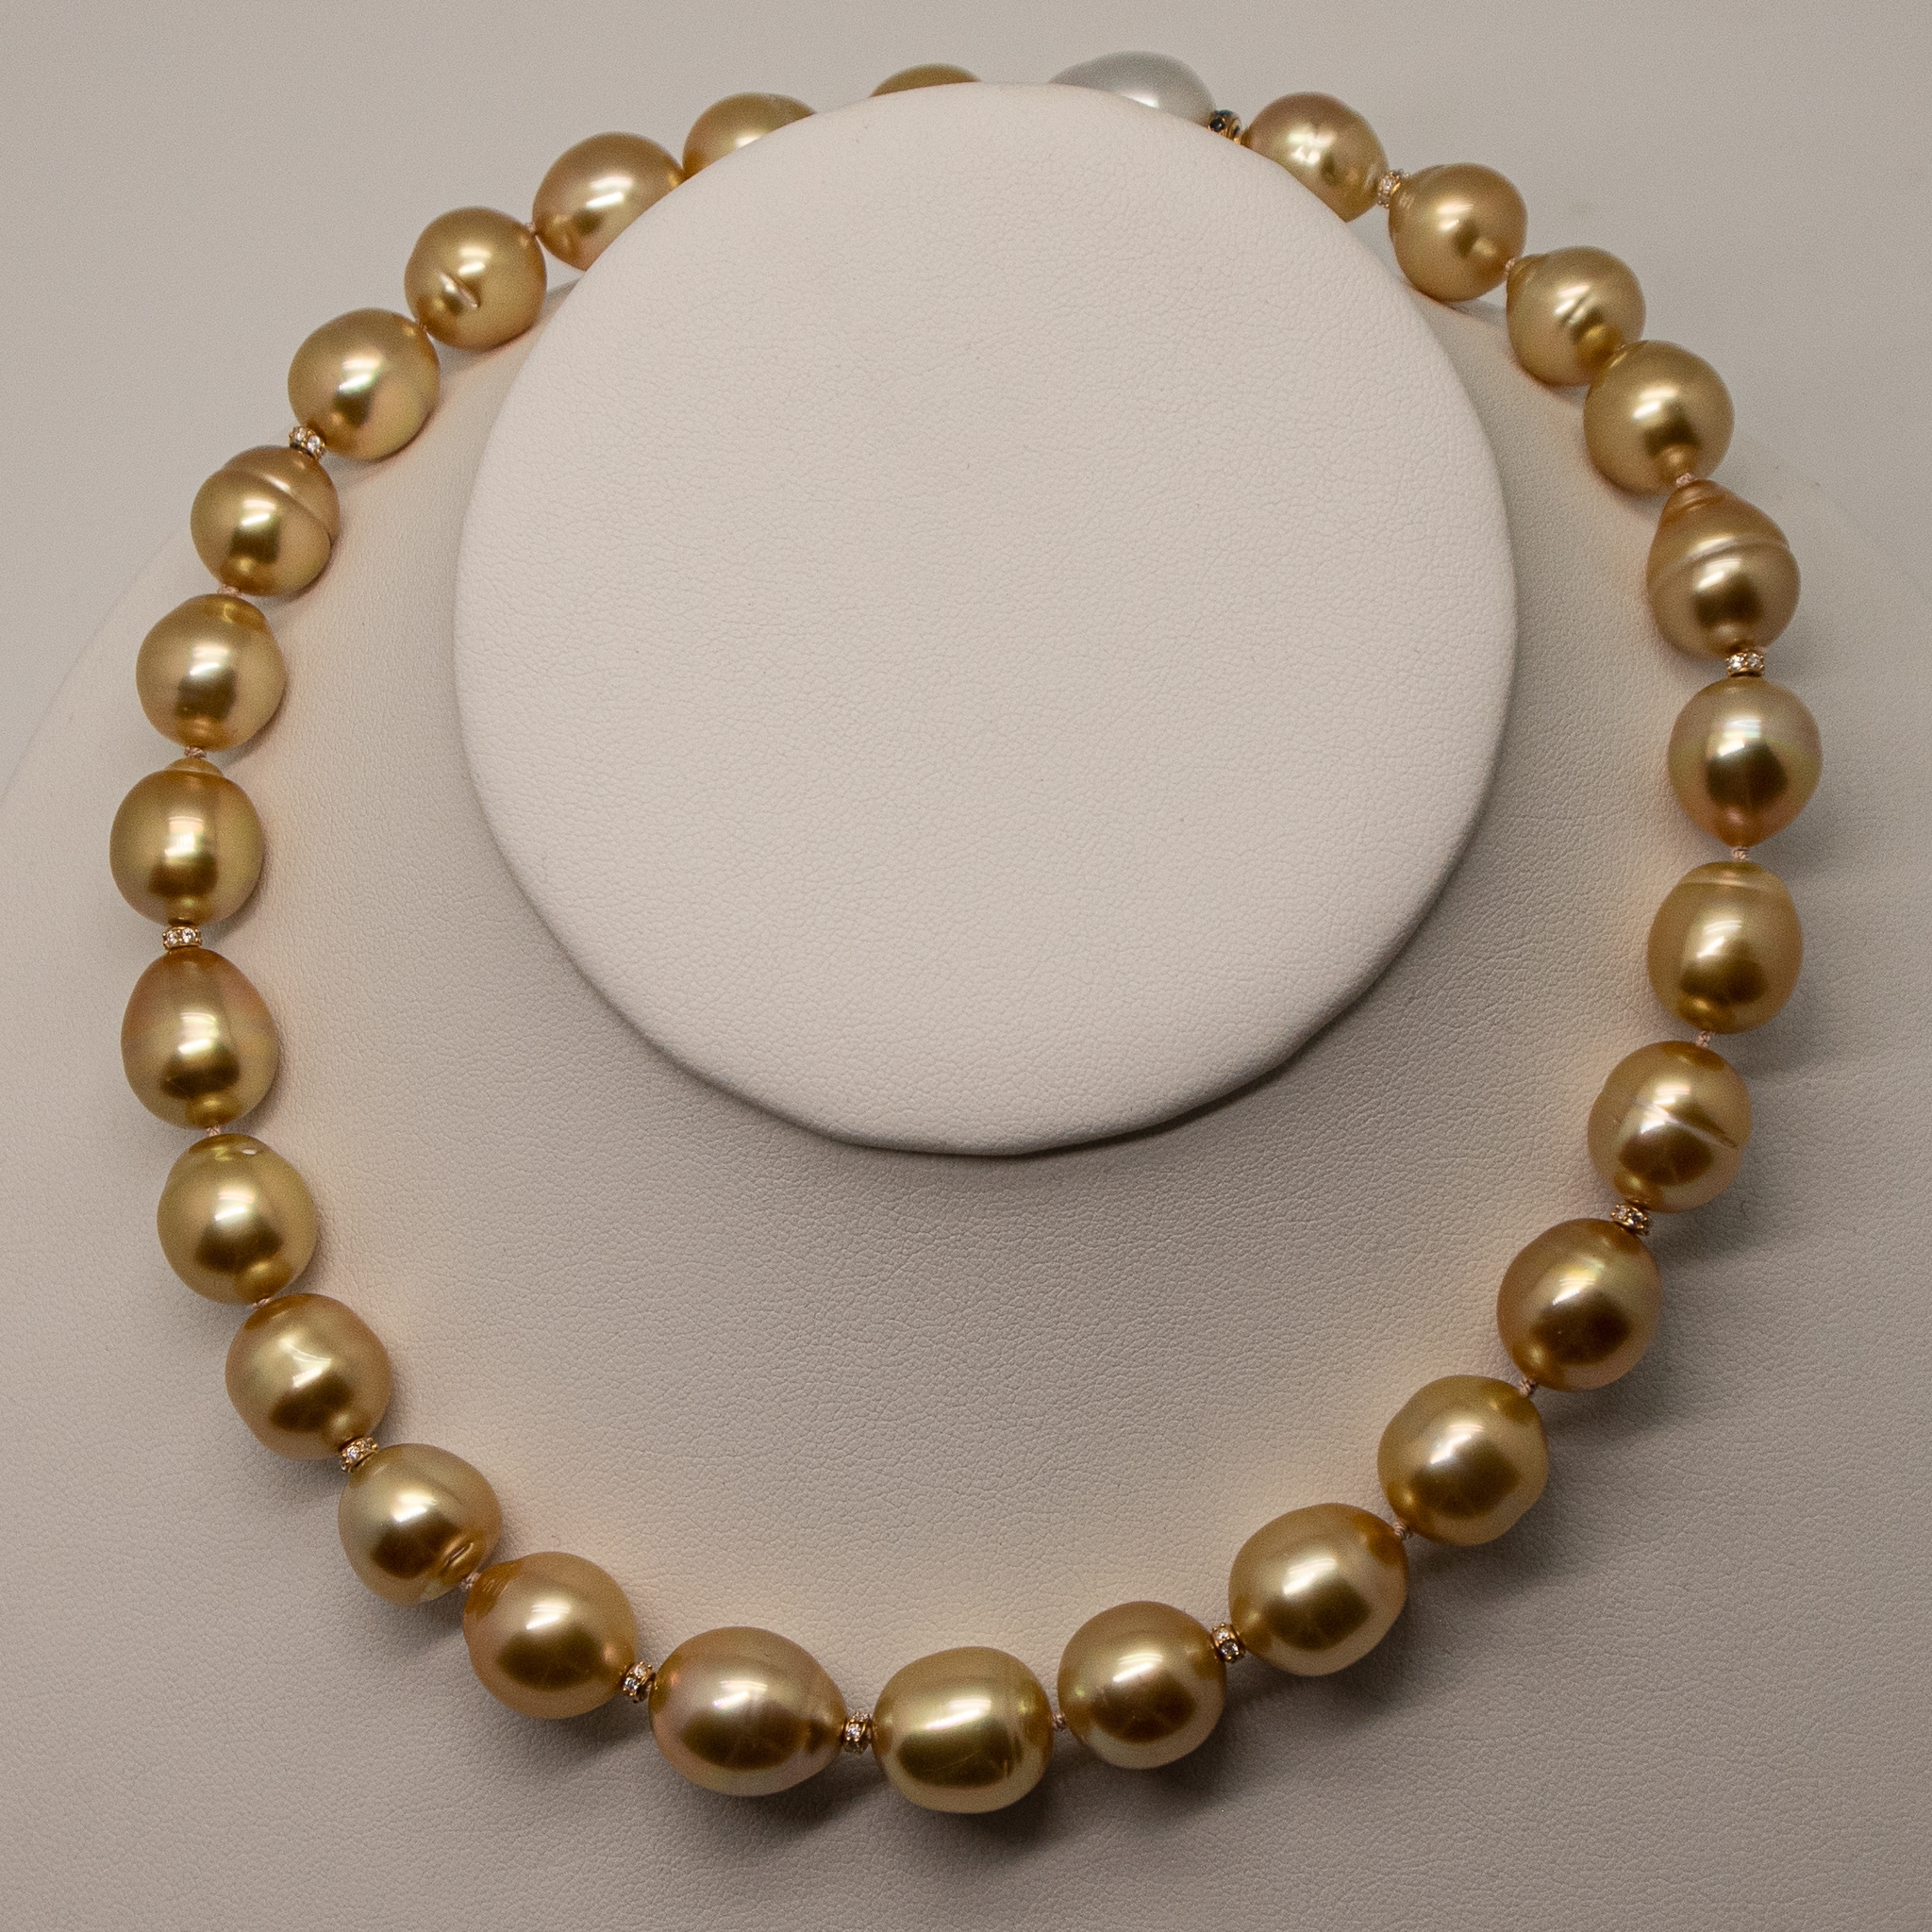 12mm x 13.9mm Baroque Golden South Sea pearl choker with diamond rondelle spacers